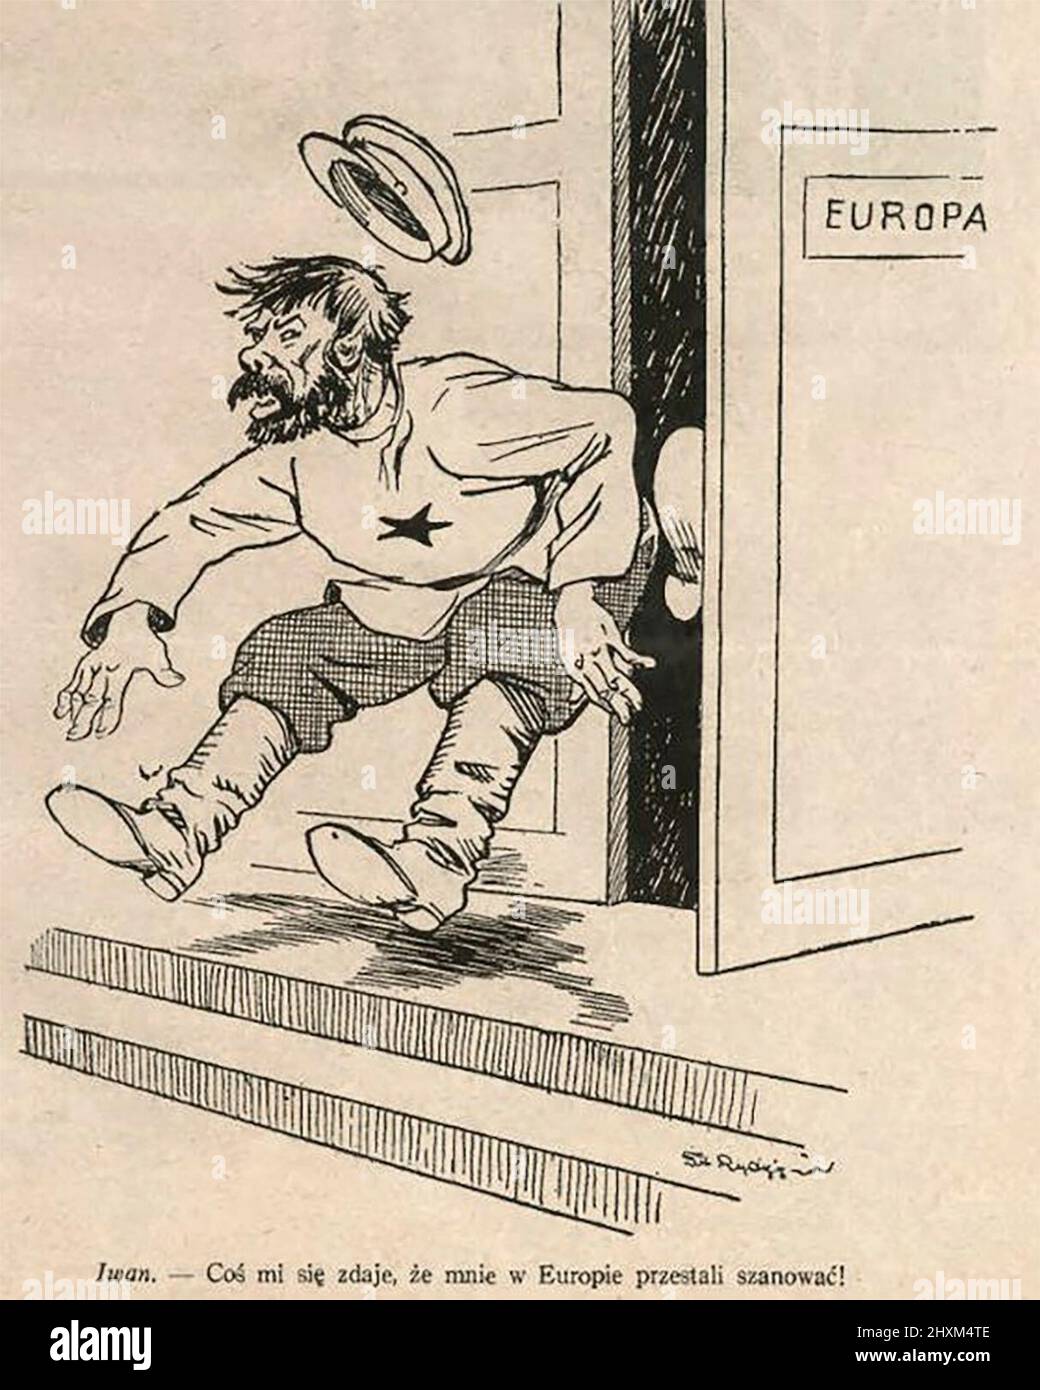 “Ivan” is kicked out of Europe’s door - a caricature devoted to the Munich Agreement of 1938 expresses the idea that Russia was alien to European civilization - Political cartoon, 1938 Stock Photo